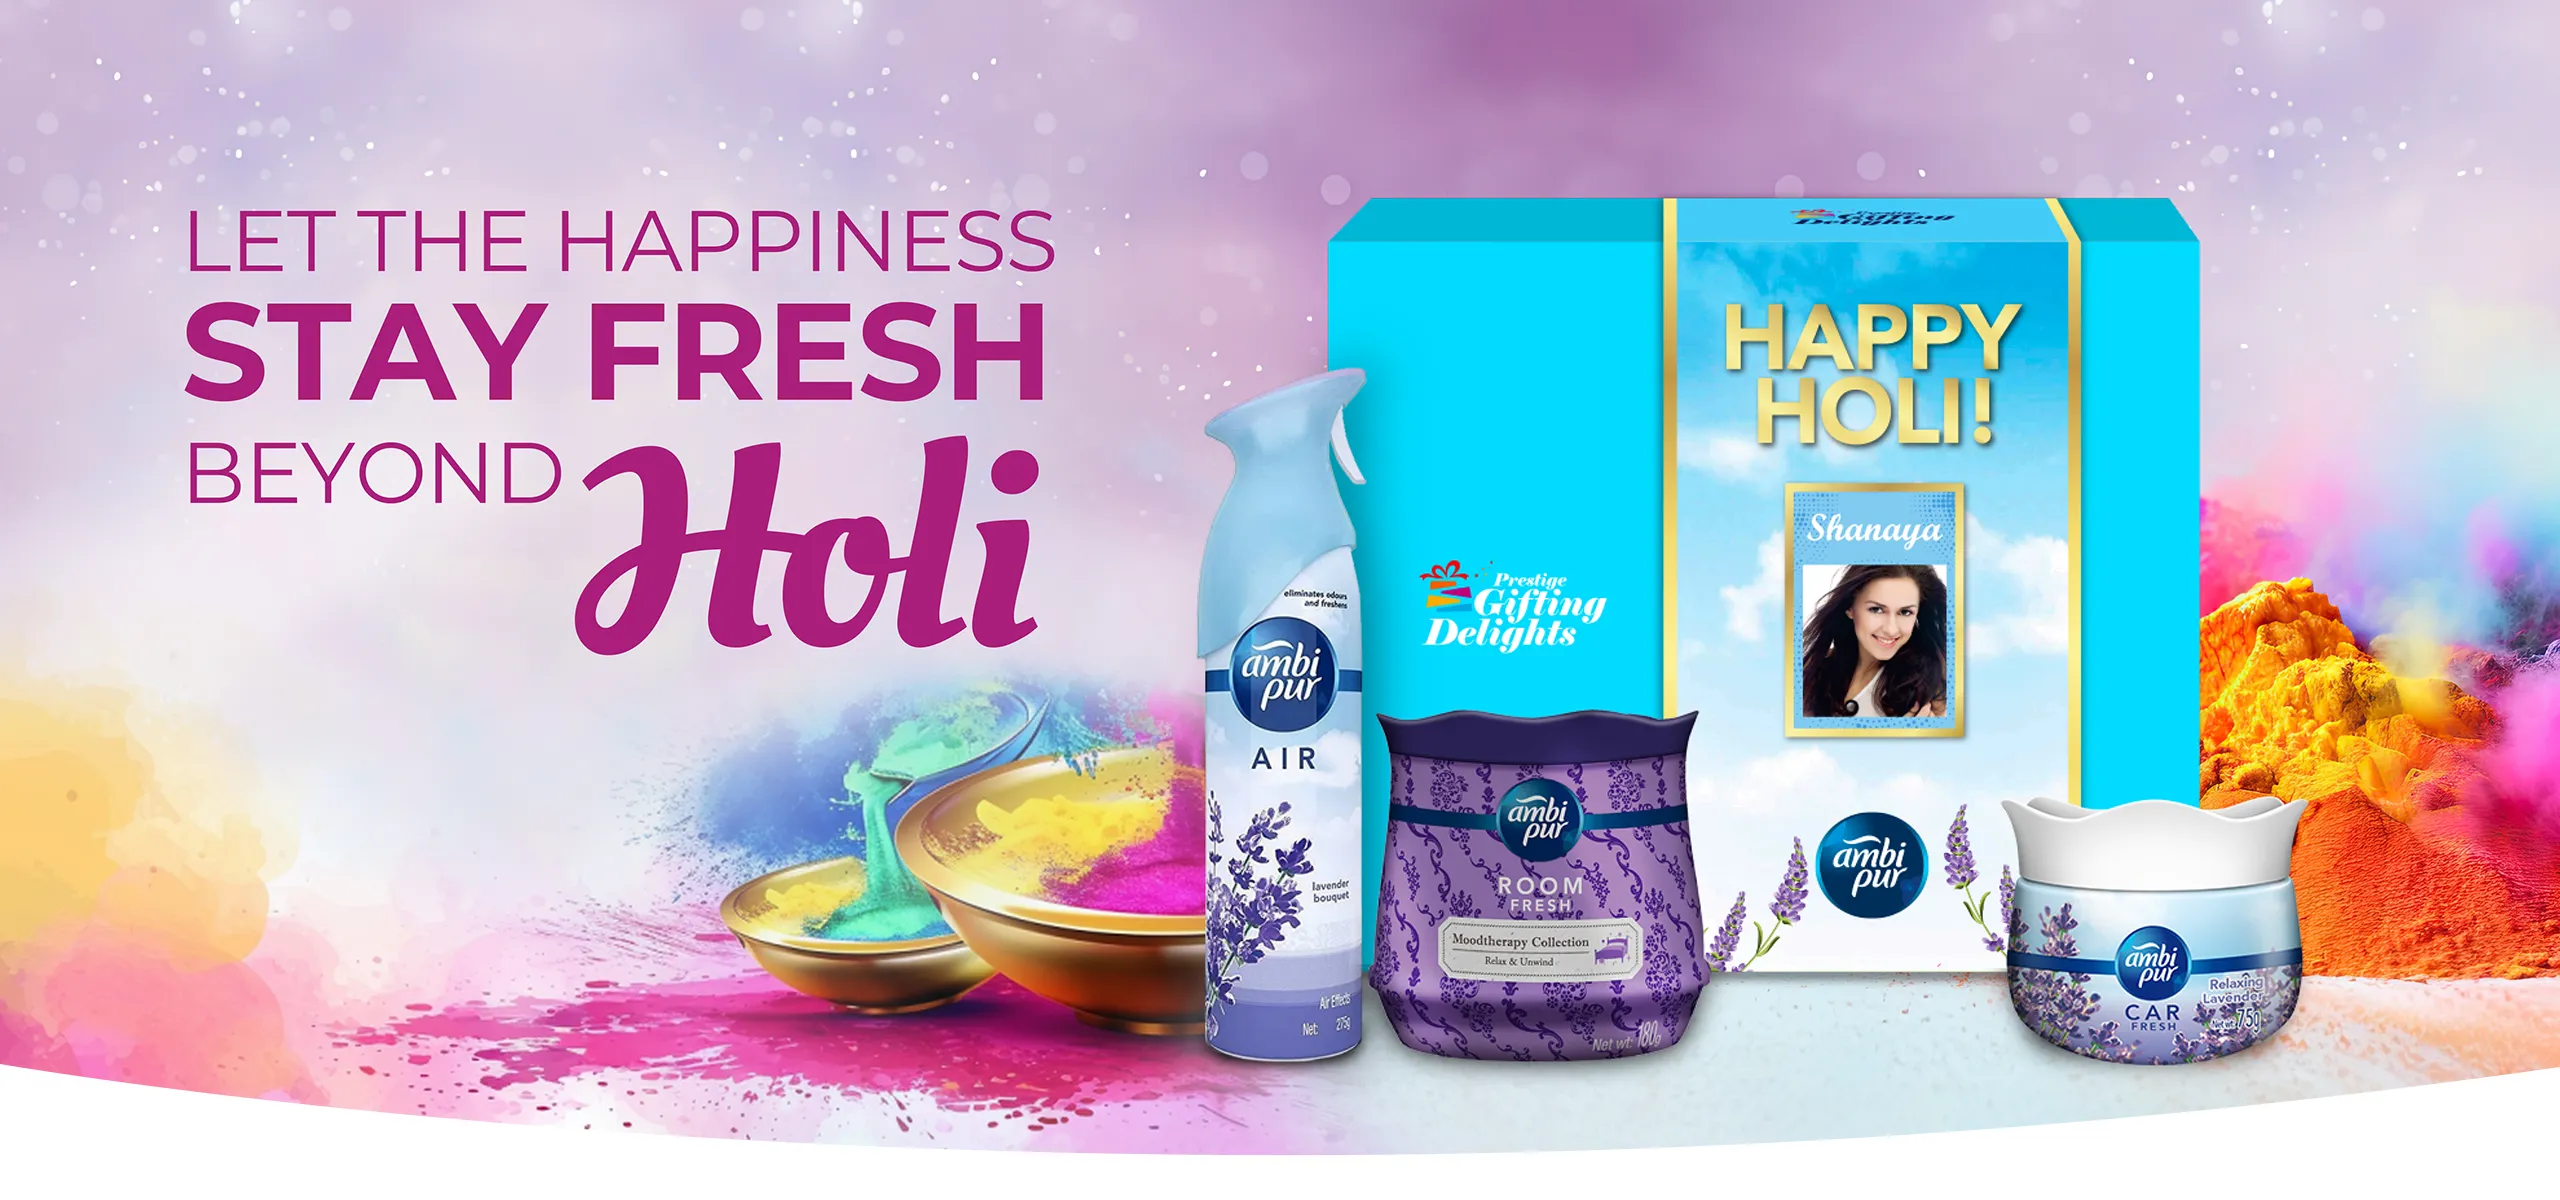 Buy Happy Holi Gifts Online in India